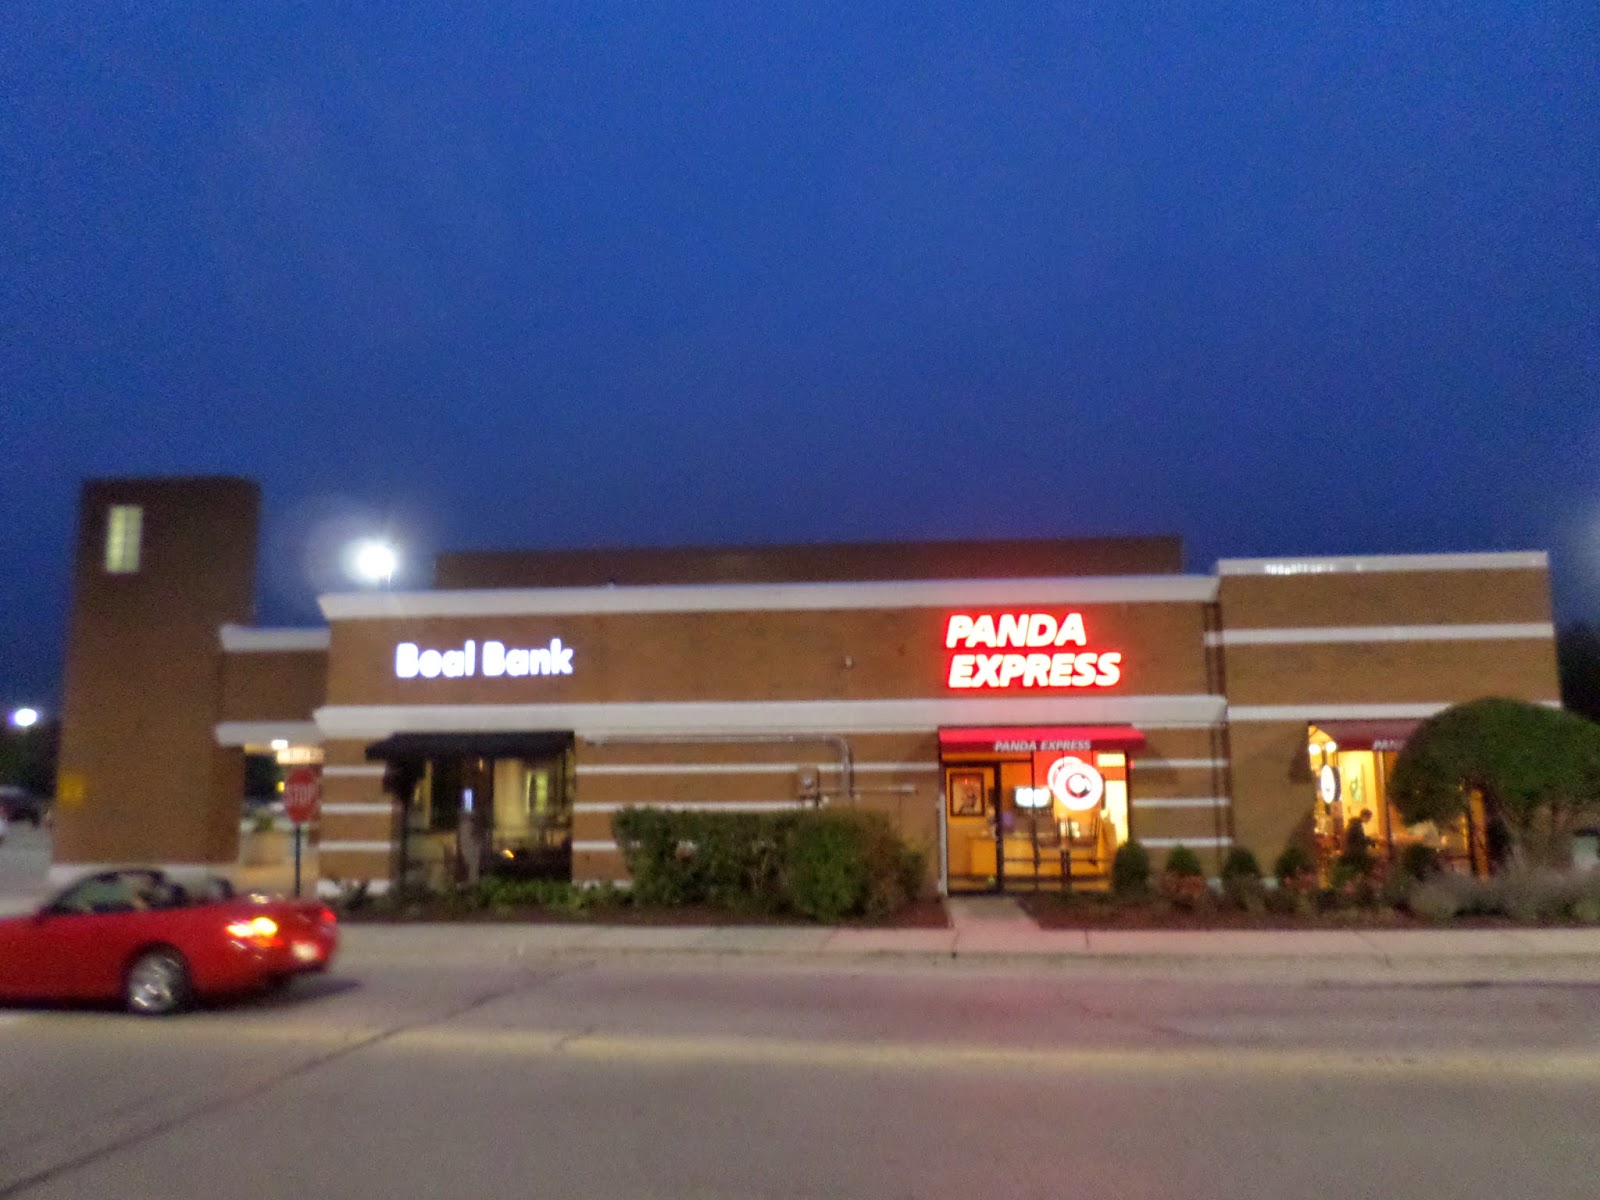 Olive Garden Panda Express And Mr Pho S Noodle House At Branson